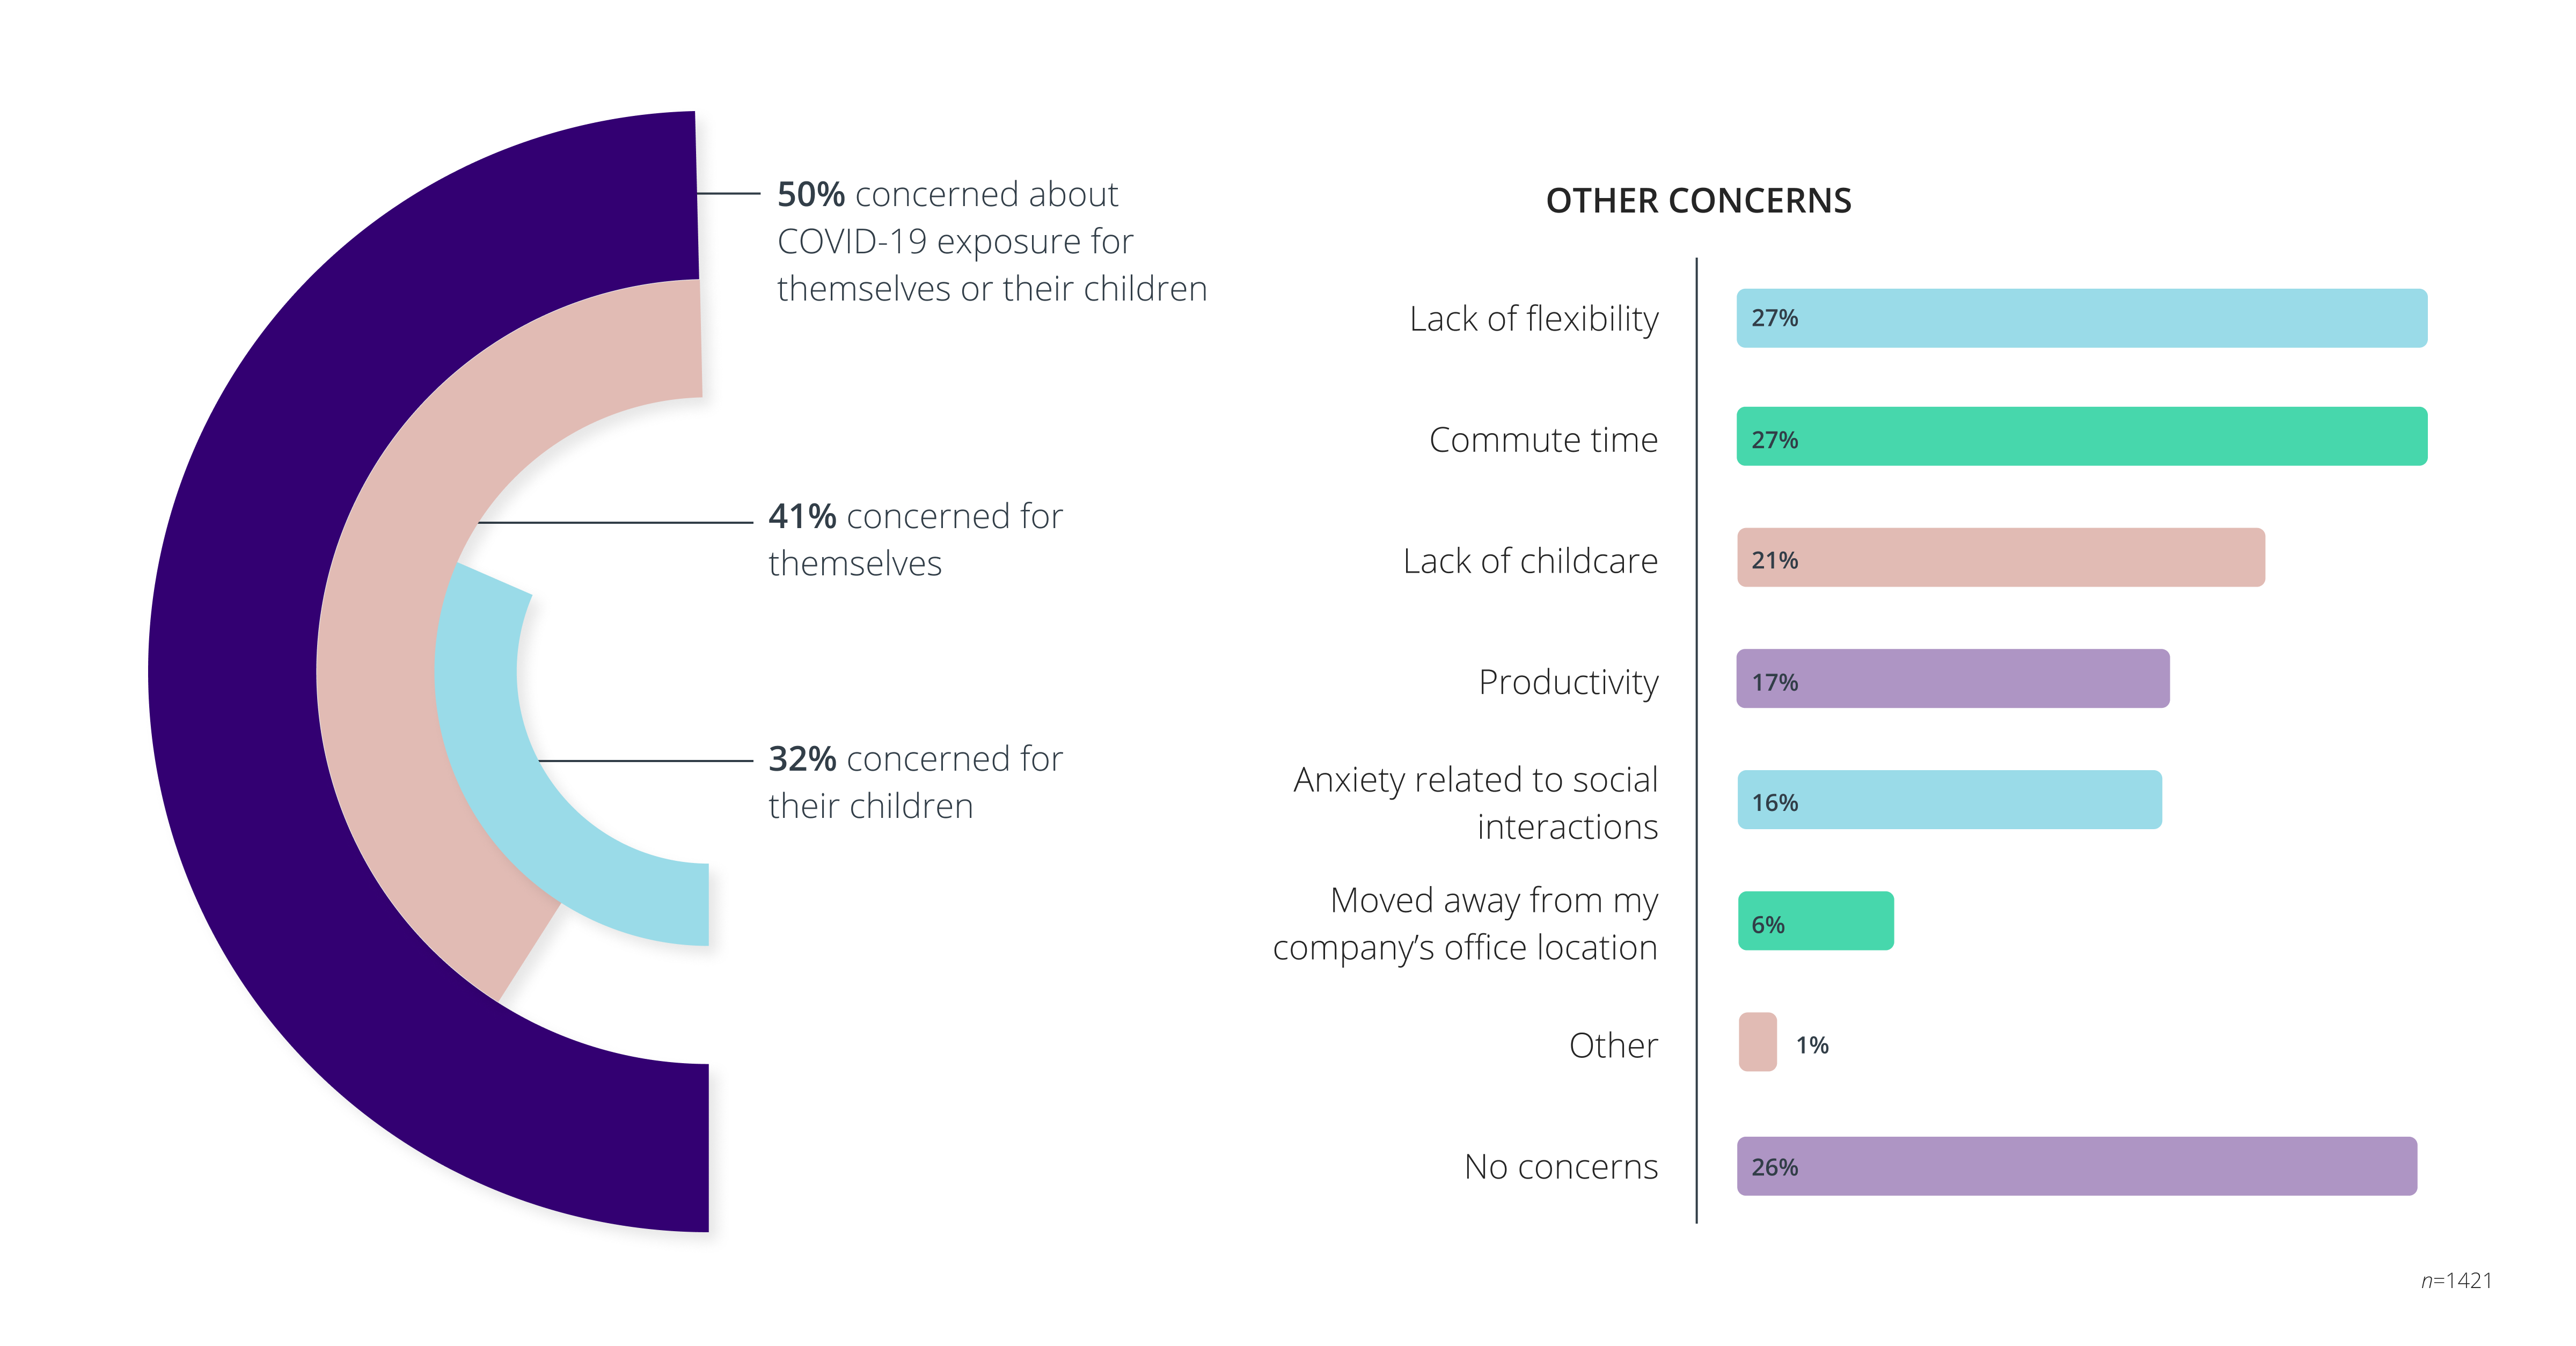 graphs of parents' various concerns with returning to work in office. Their top concern is exposure to COVID (50%) followed by lack of flexibility (27%), commute time (27%), lack of childcare (21%), productivity (17%), and social anxiety (16%). 26% have no concerns.